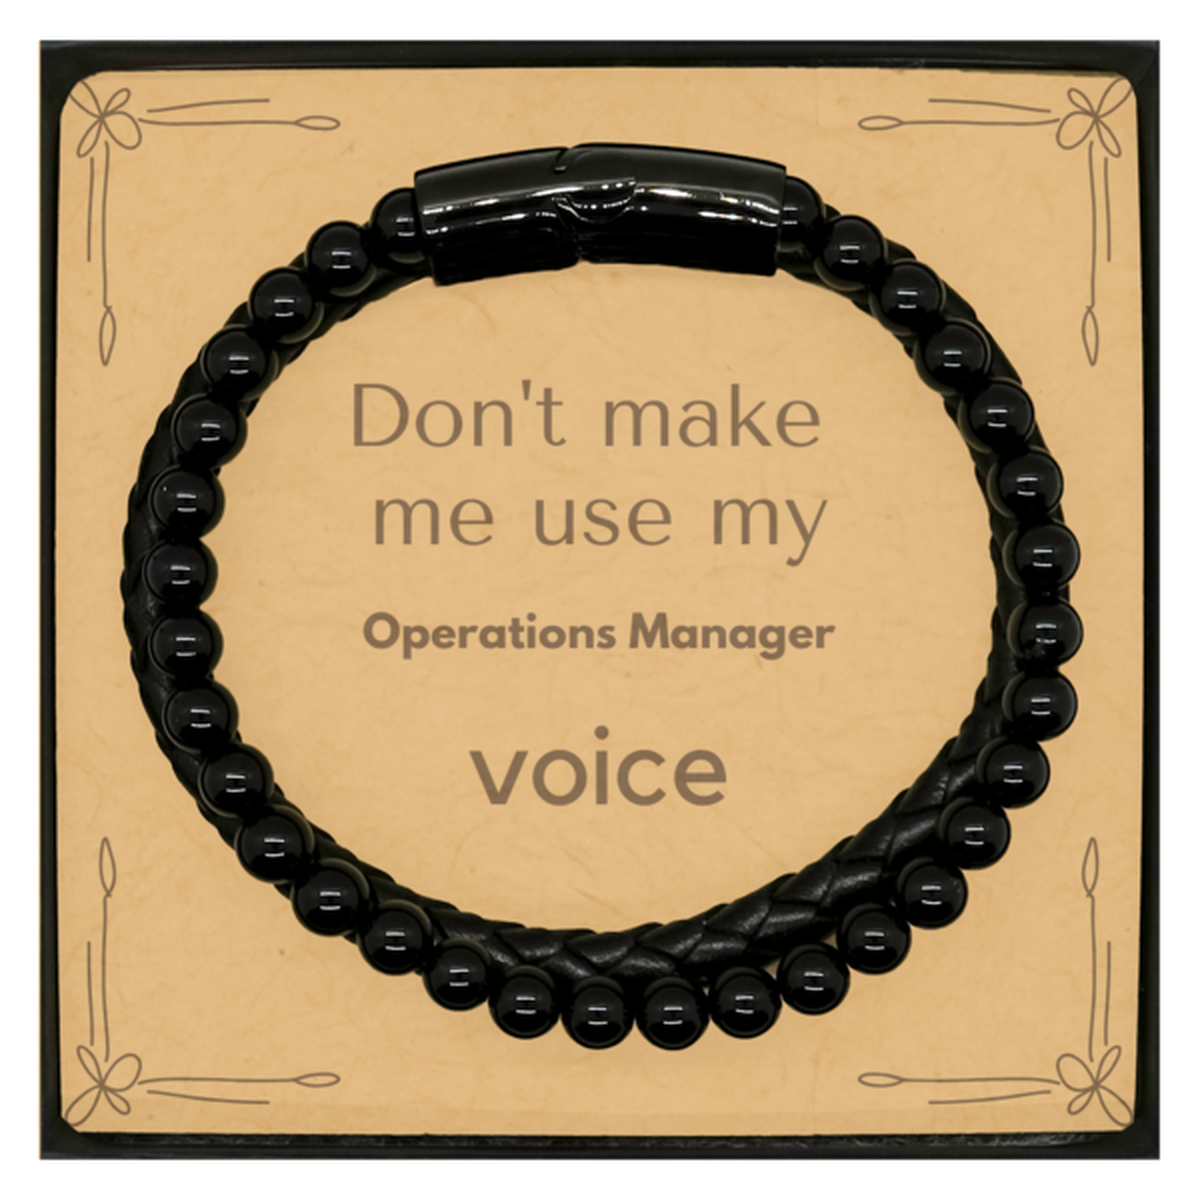 Don't make me use my Operations Manager voice, Sarcasm Operations Manager Card Gifts, Christmas Operations Manager Stone Leather Bracelets Birthday Unique Gifts For Operations Manager Coworkers, Men, Women, Colleague, Friends